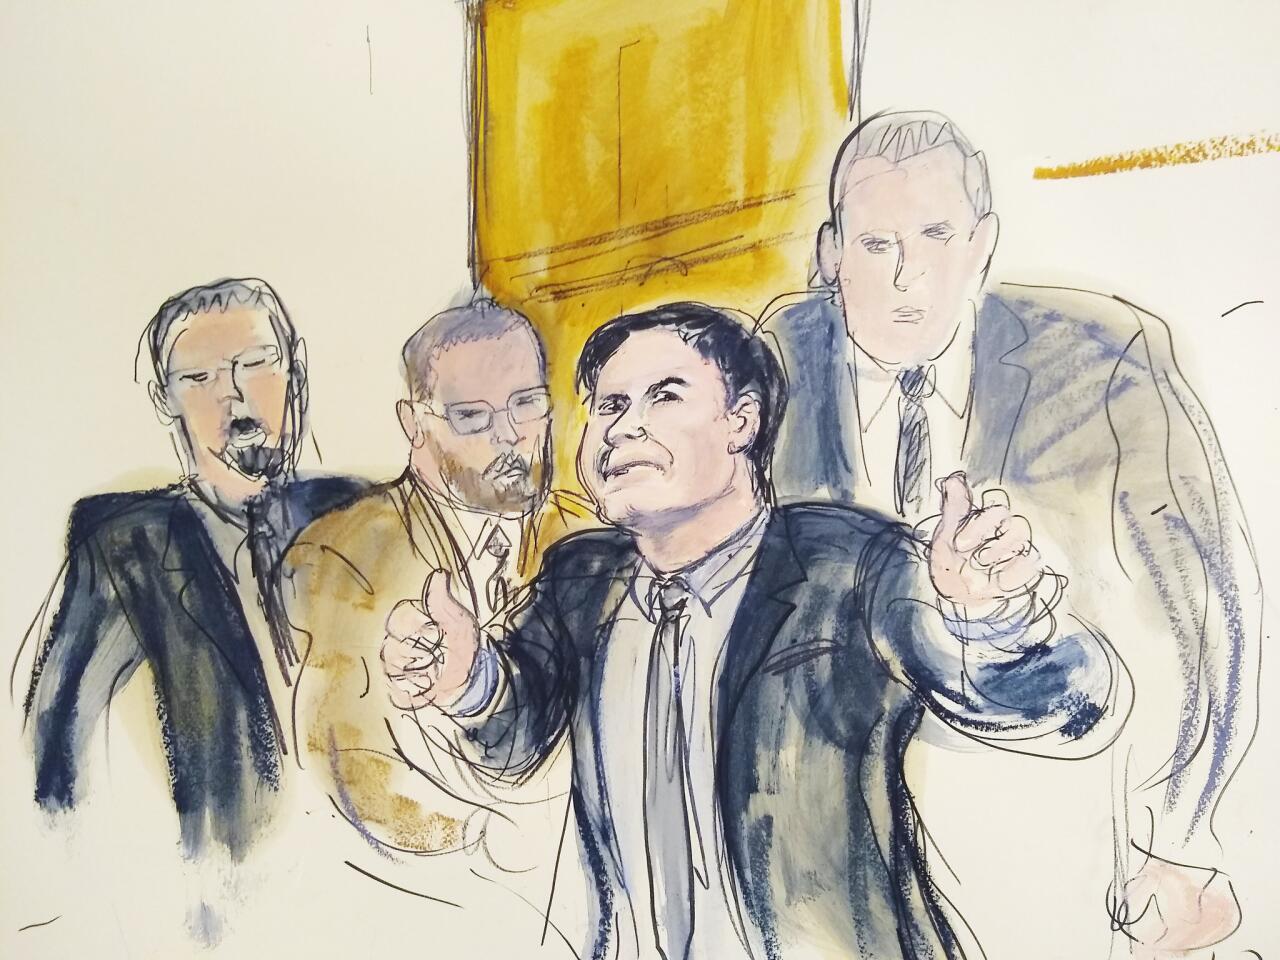 Joaquin "El Chapo" Guzman gestures "thumbs up" to his wife as U.S. marshals remove him from the courtroom after he was found guilty of drug-trafficking in New York.